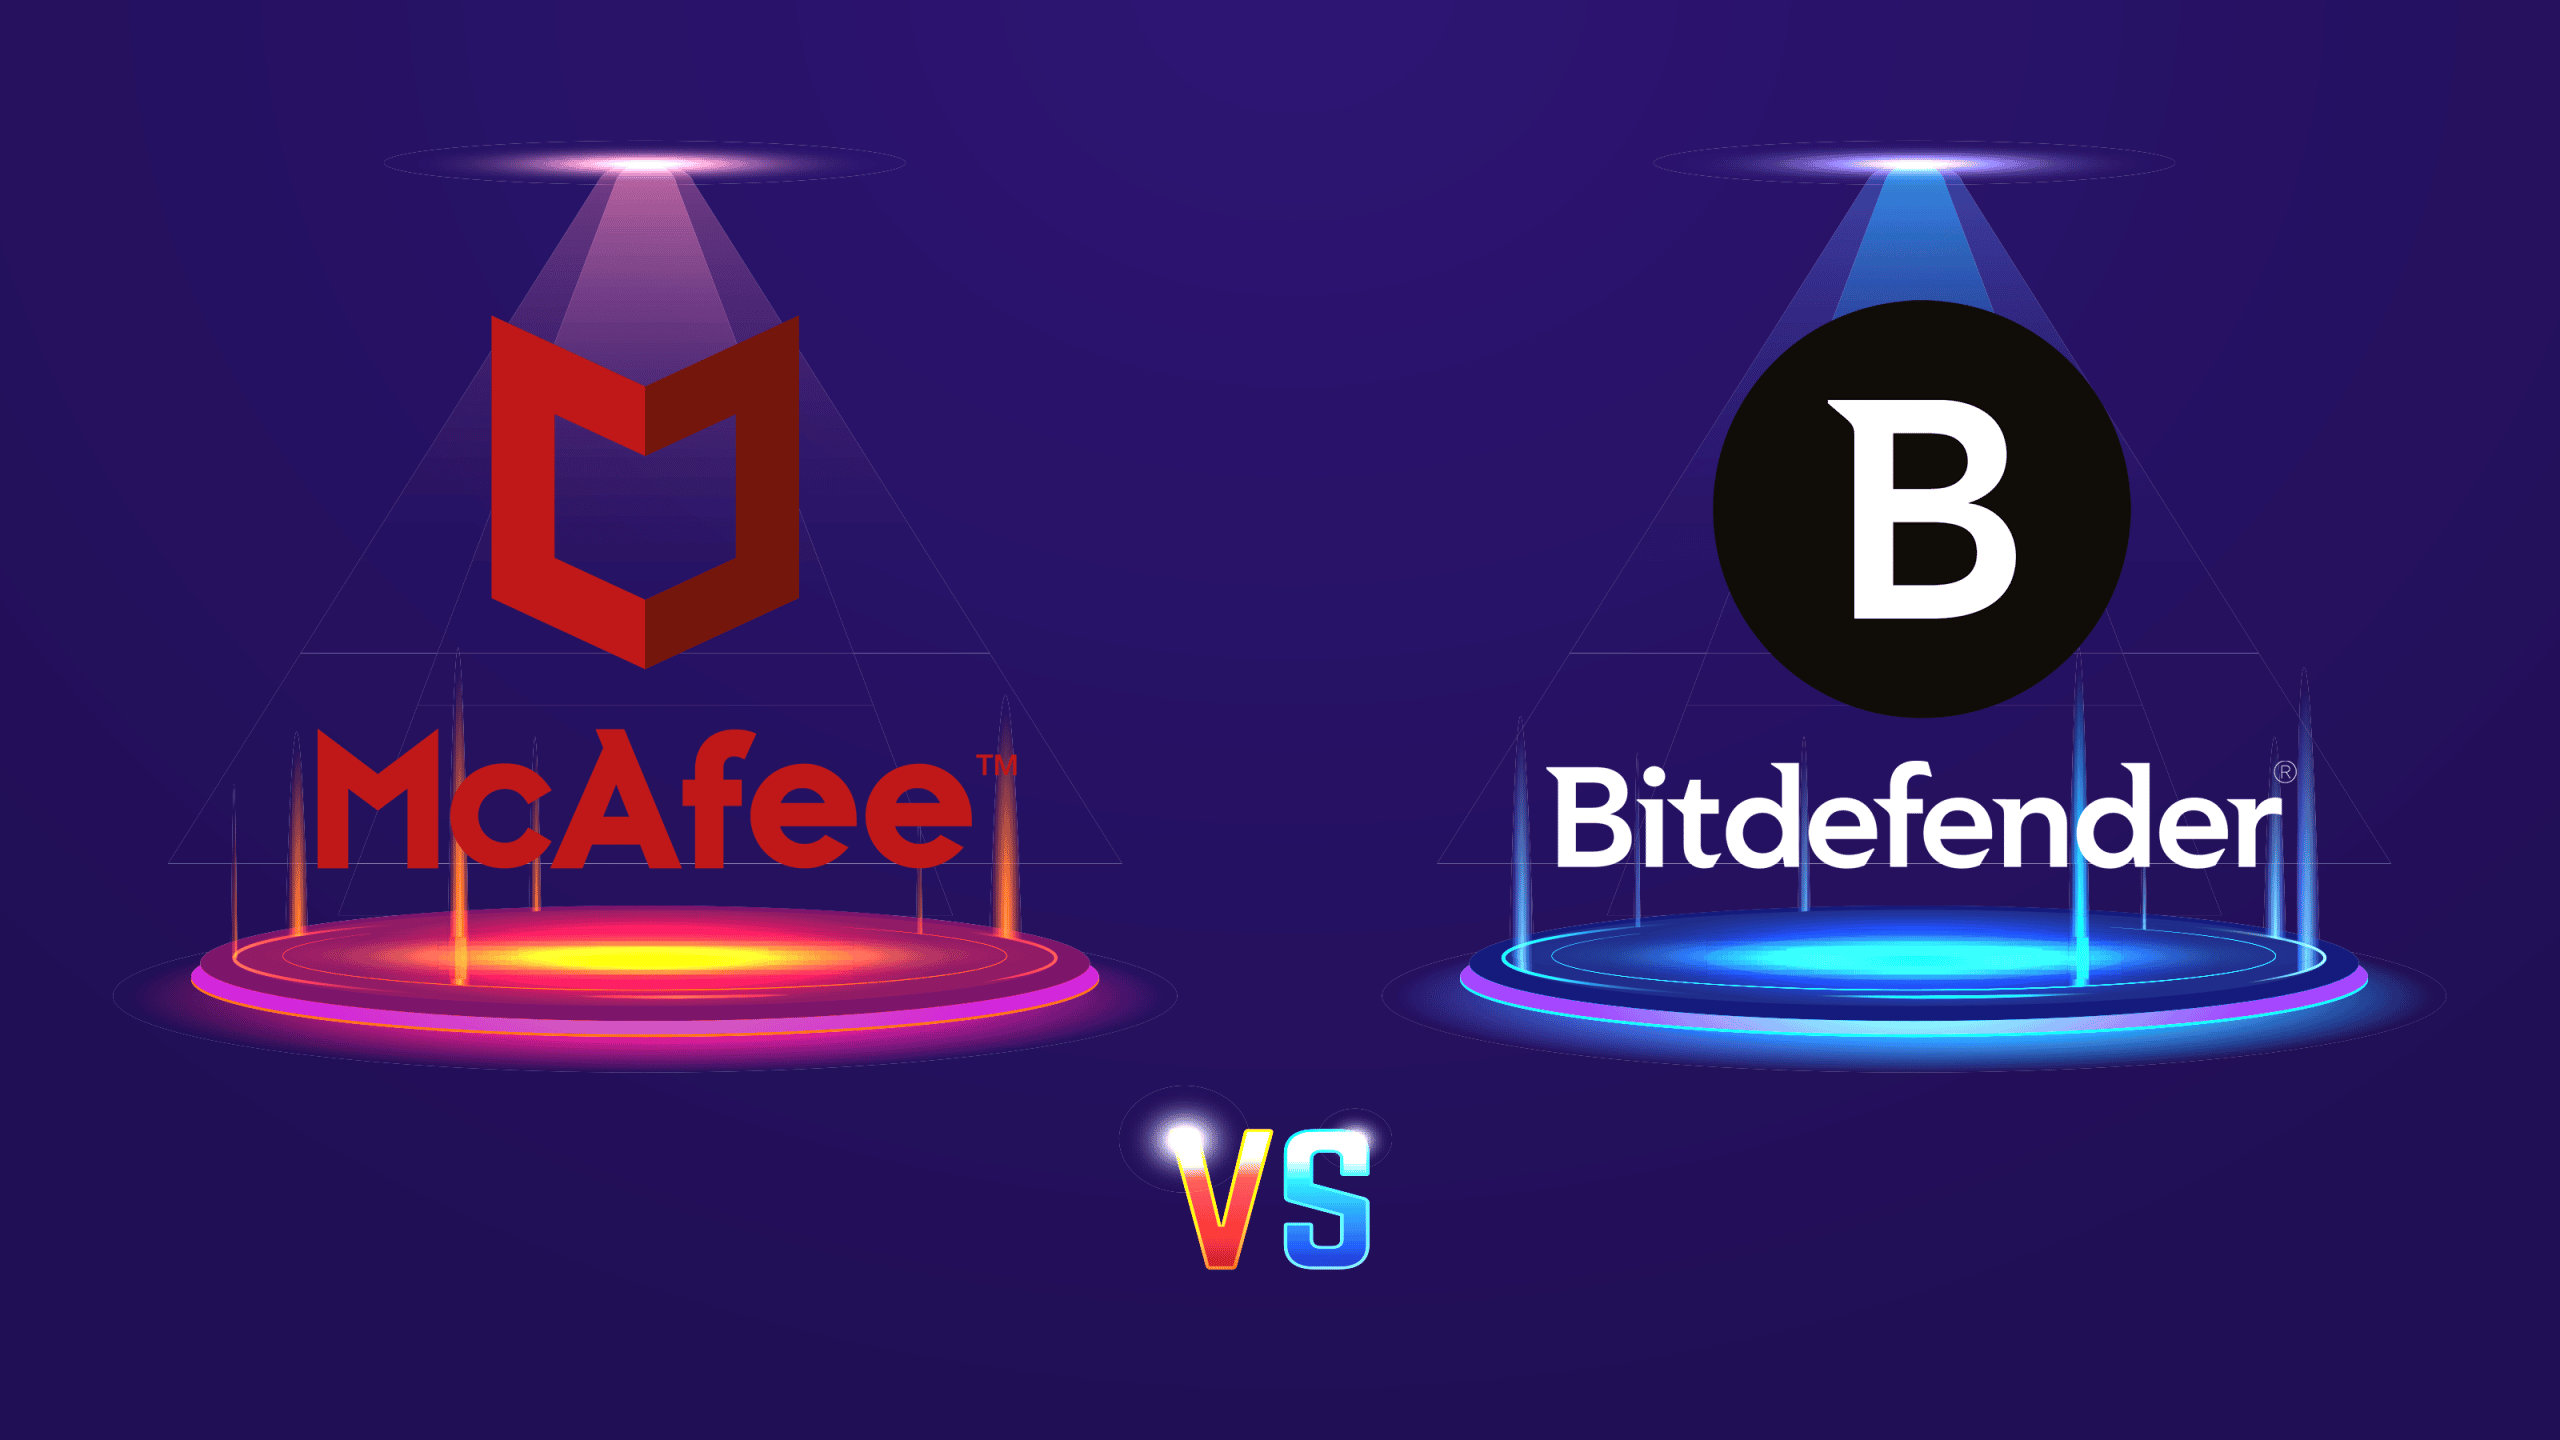 Bitdefender vs McAfee in 2022. The Battle of The Antivirus Supremes